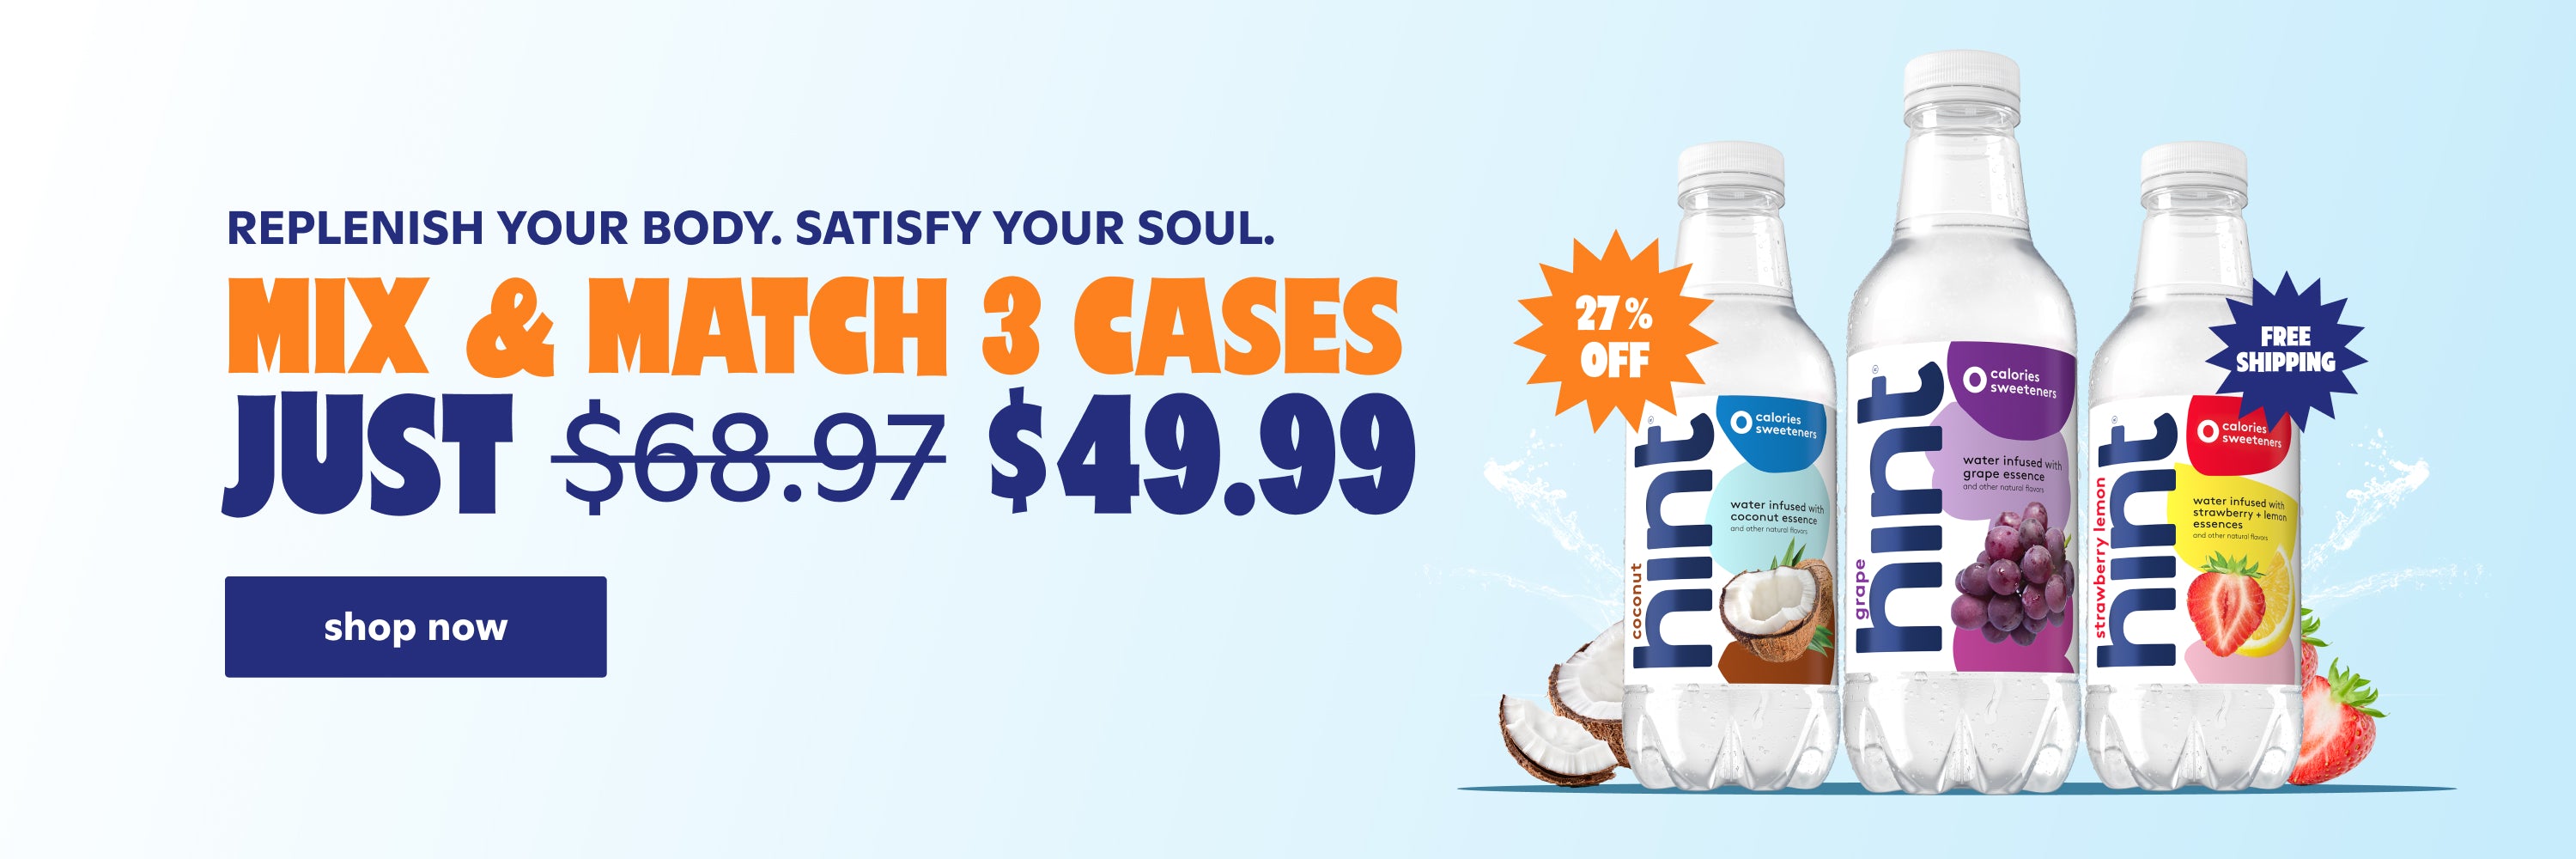 Mix and Match 3 cases for $49.99 + FREE shipping. Shop now.